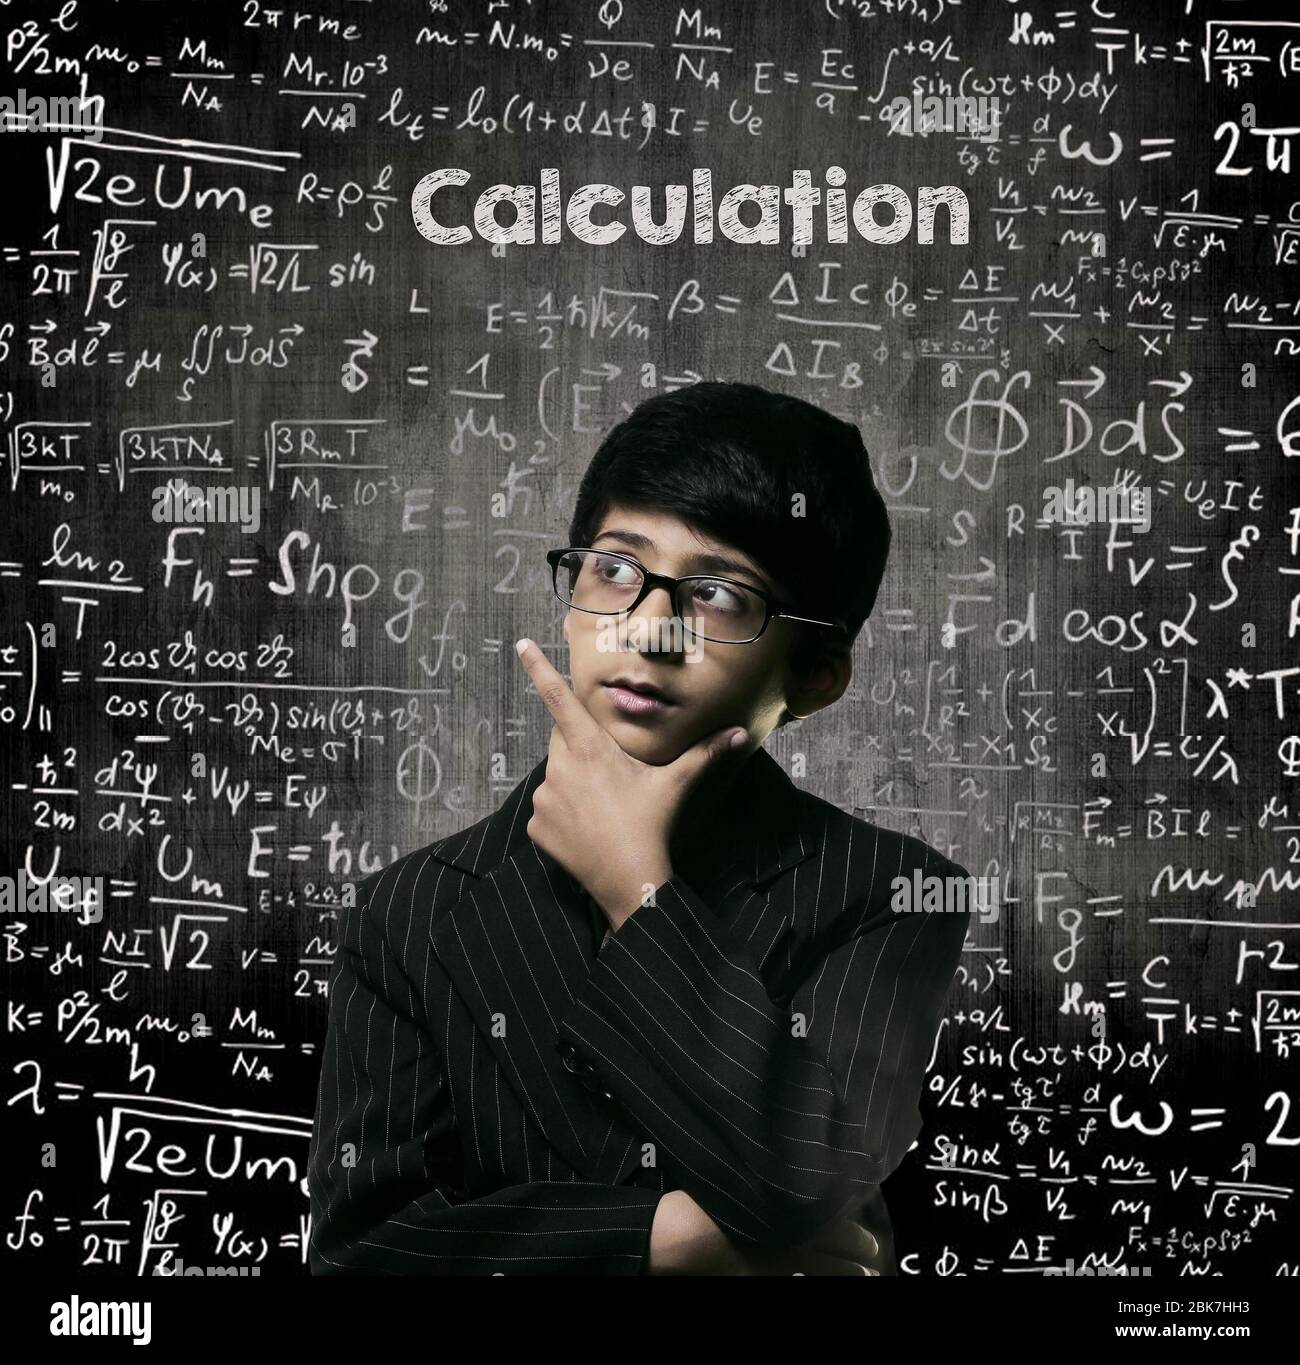 Cute Intelligent Little Boy Looking Up Thinking andWearing Glasses Standing Before A Chalkboard, Chemical Formulas Are Written On Board With The Chalk Stock Photo